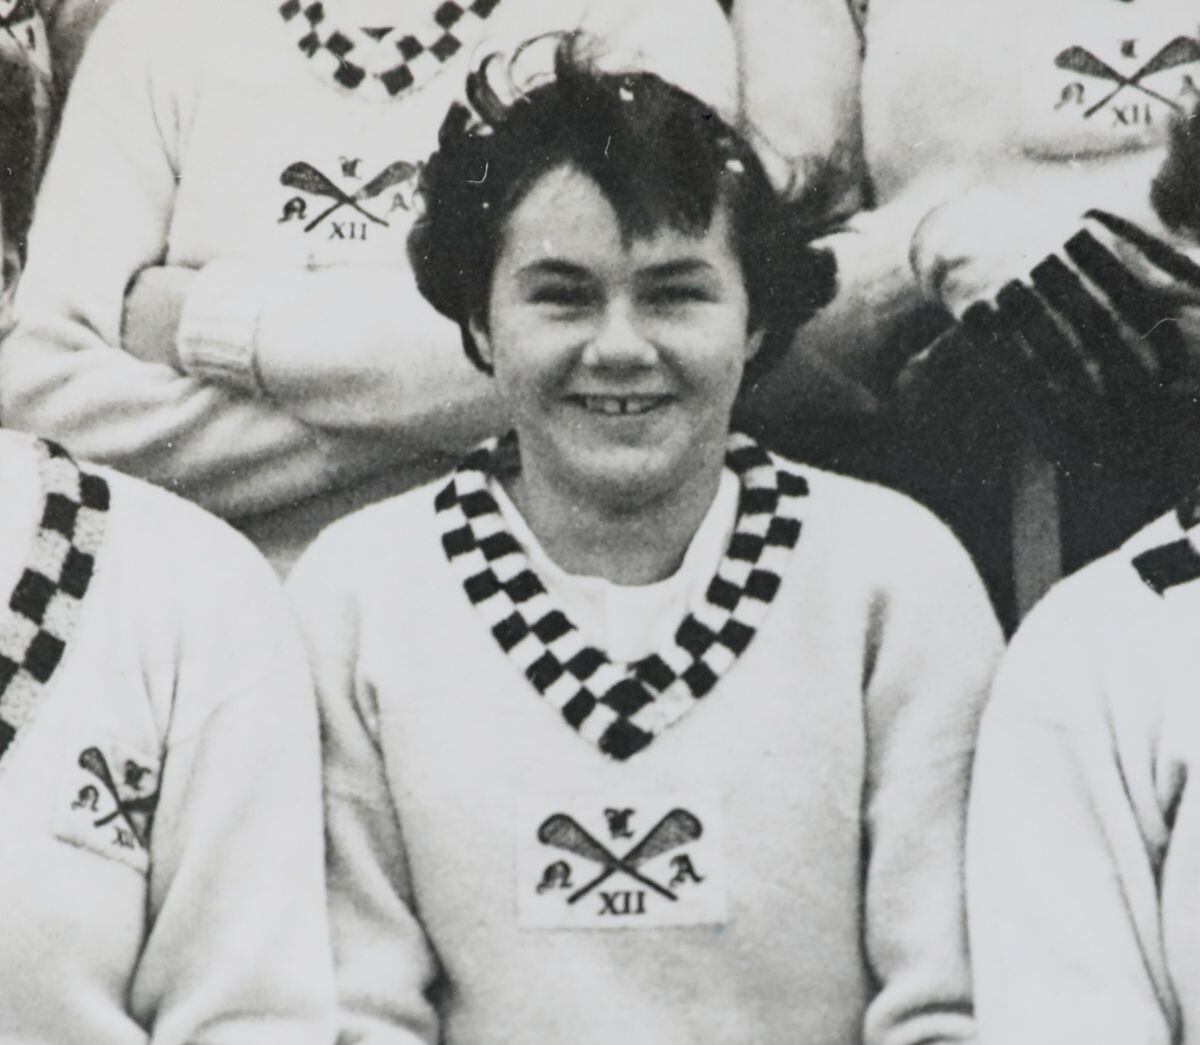 Jenny as part of the North of England lacrosse team in 1948/9.